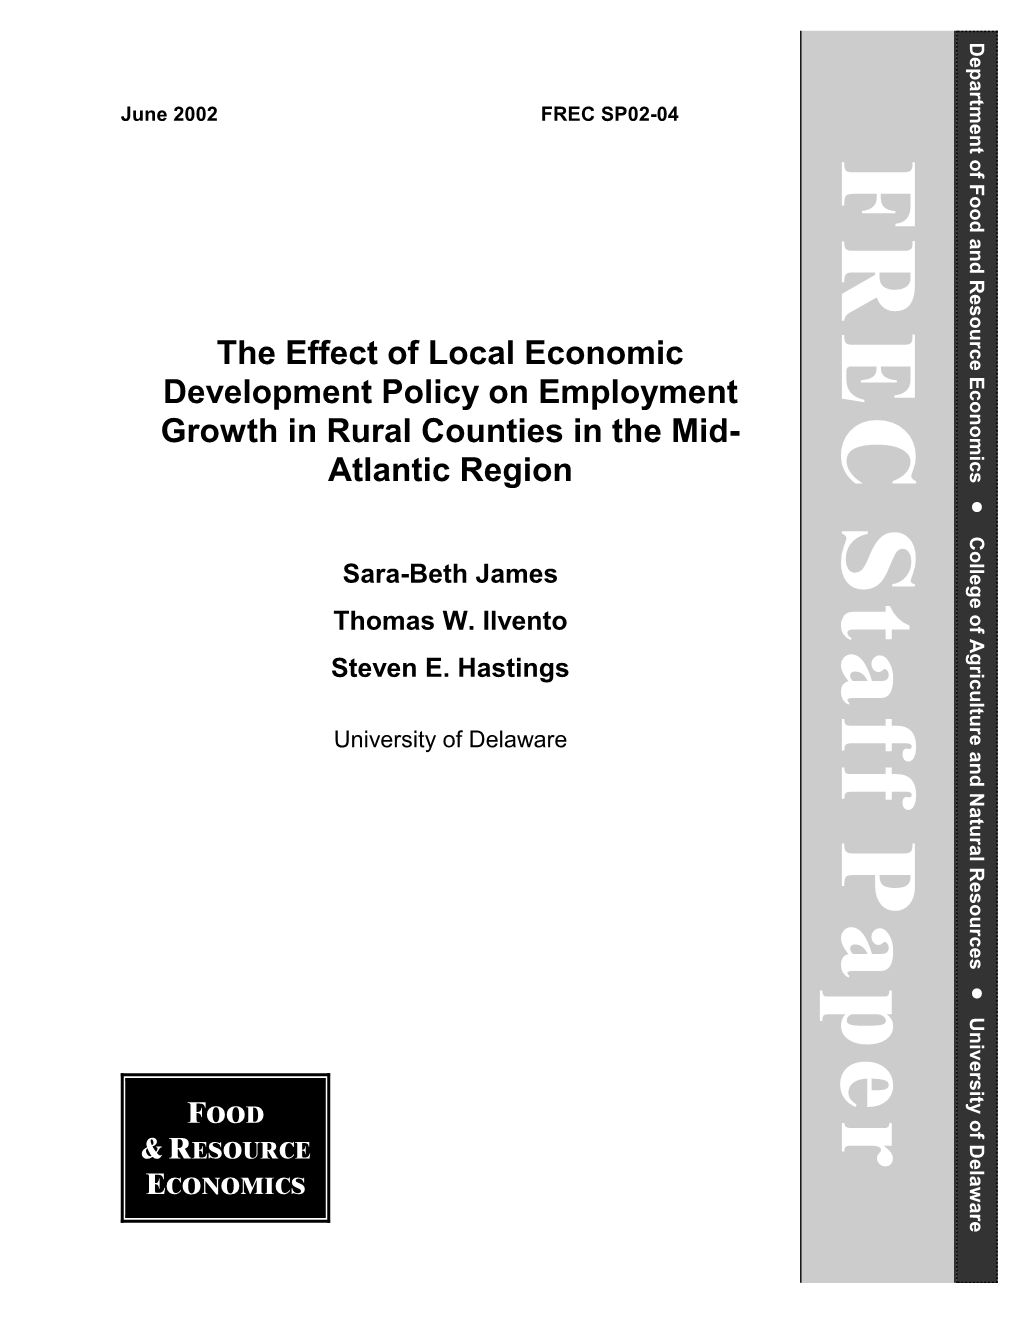 The Effect of Local Economic Development Policy on Employment Growth in Rural Counties in the Mid-Atlantic Region